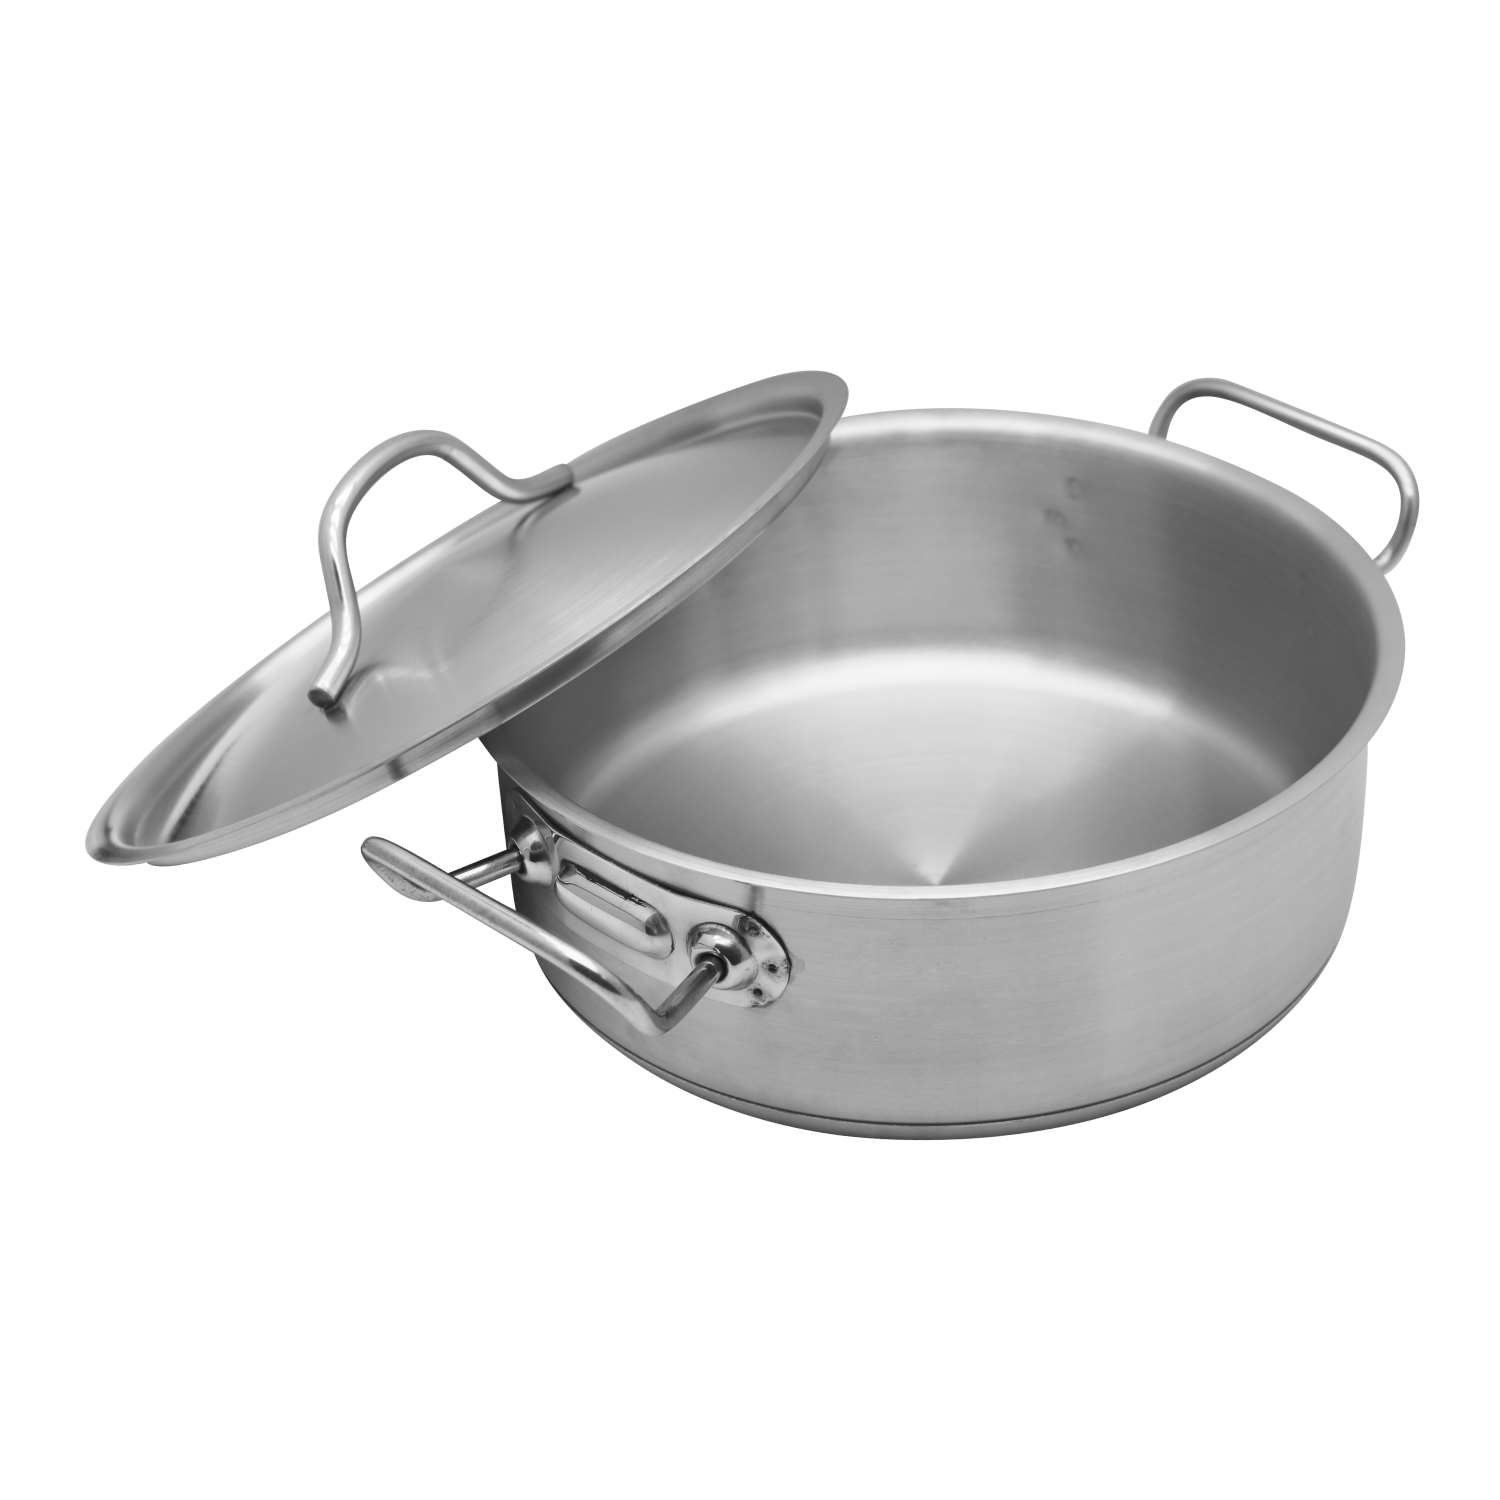 Chefset Steel Low Casserole Low Cooking Pot With Lid And Double Handle